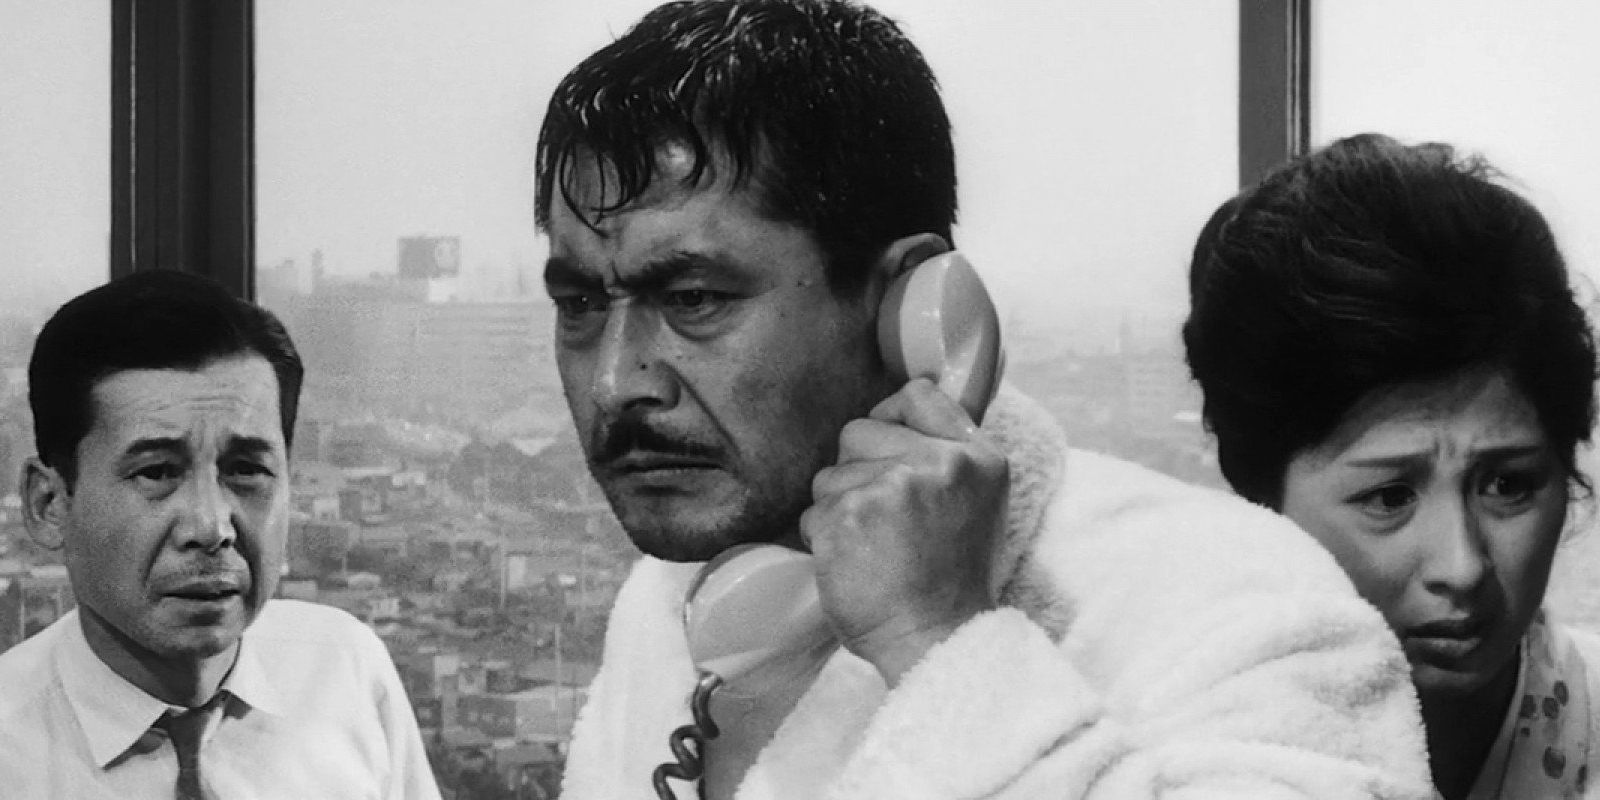 A man looking angry on the phone with two people behind him in High and Low